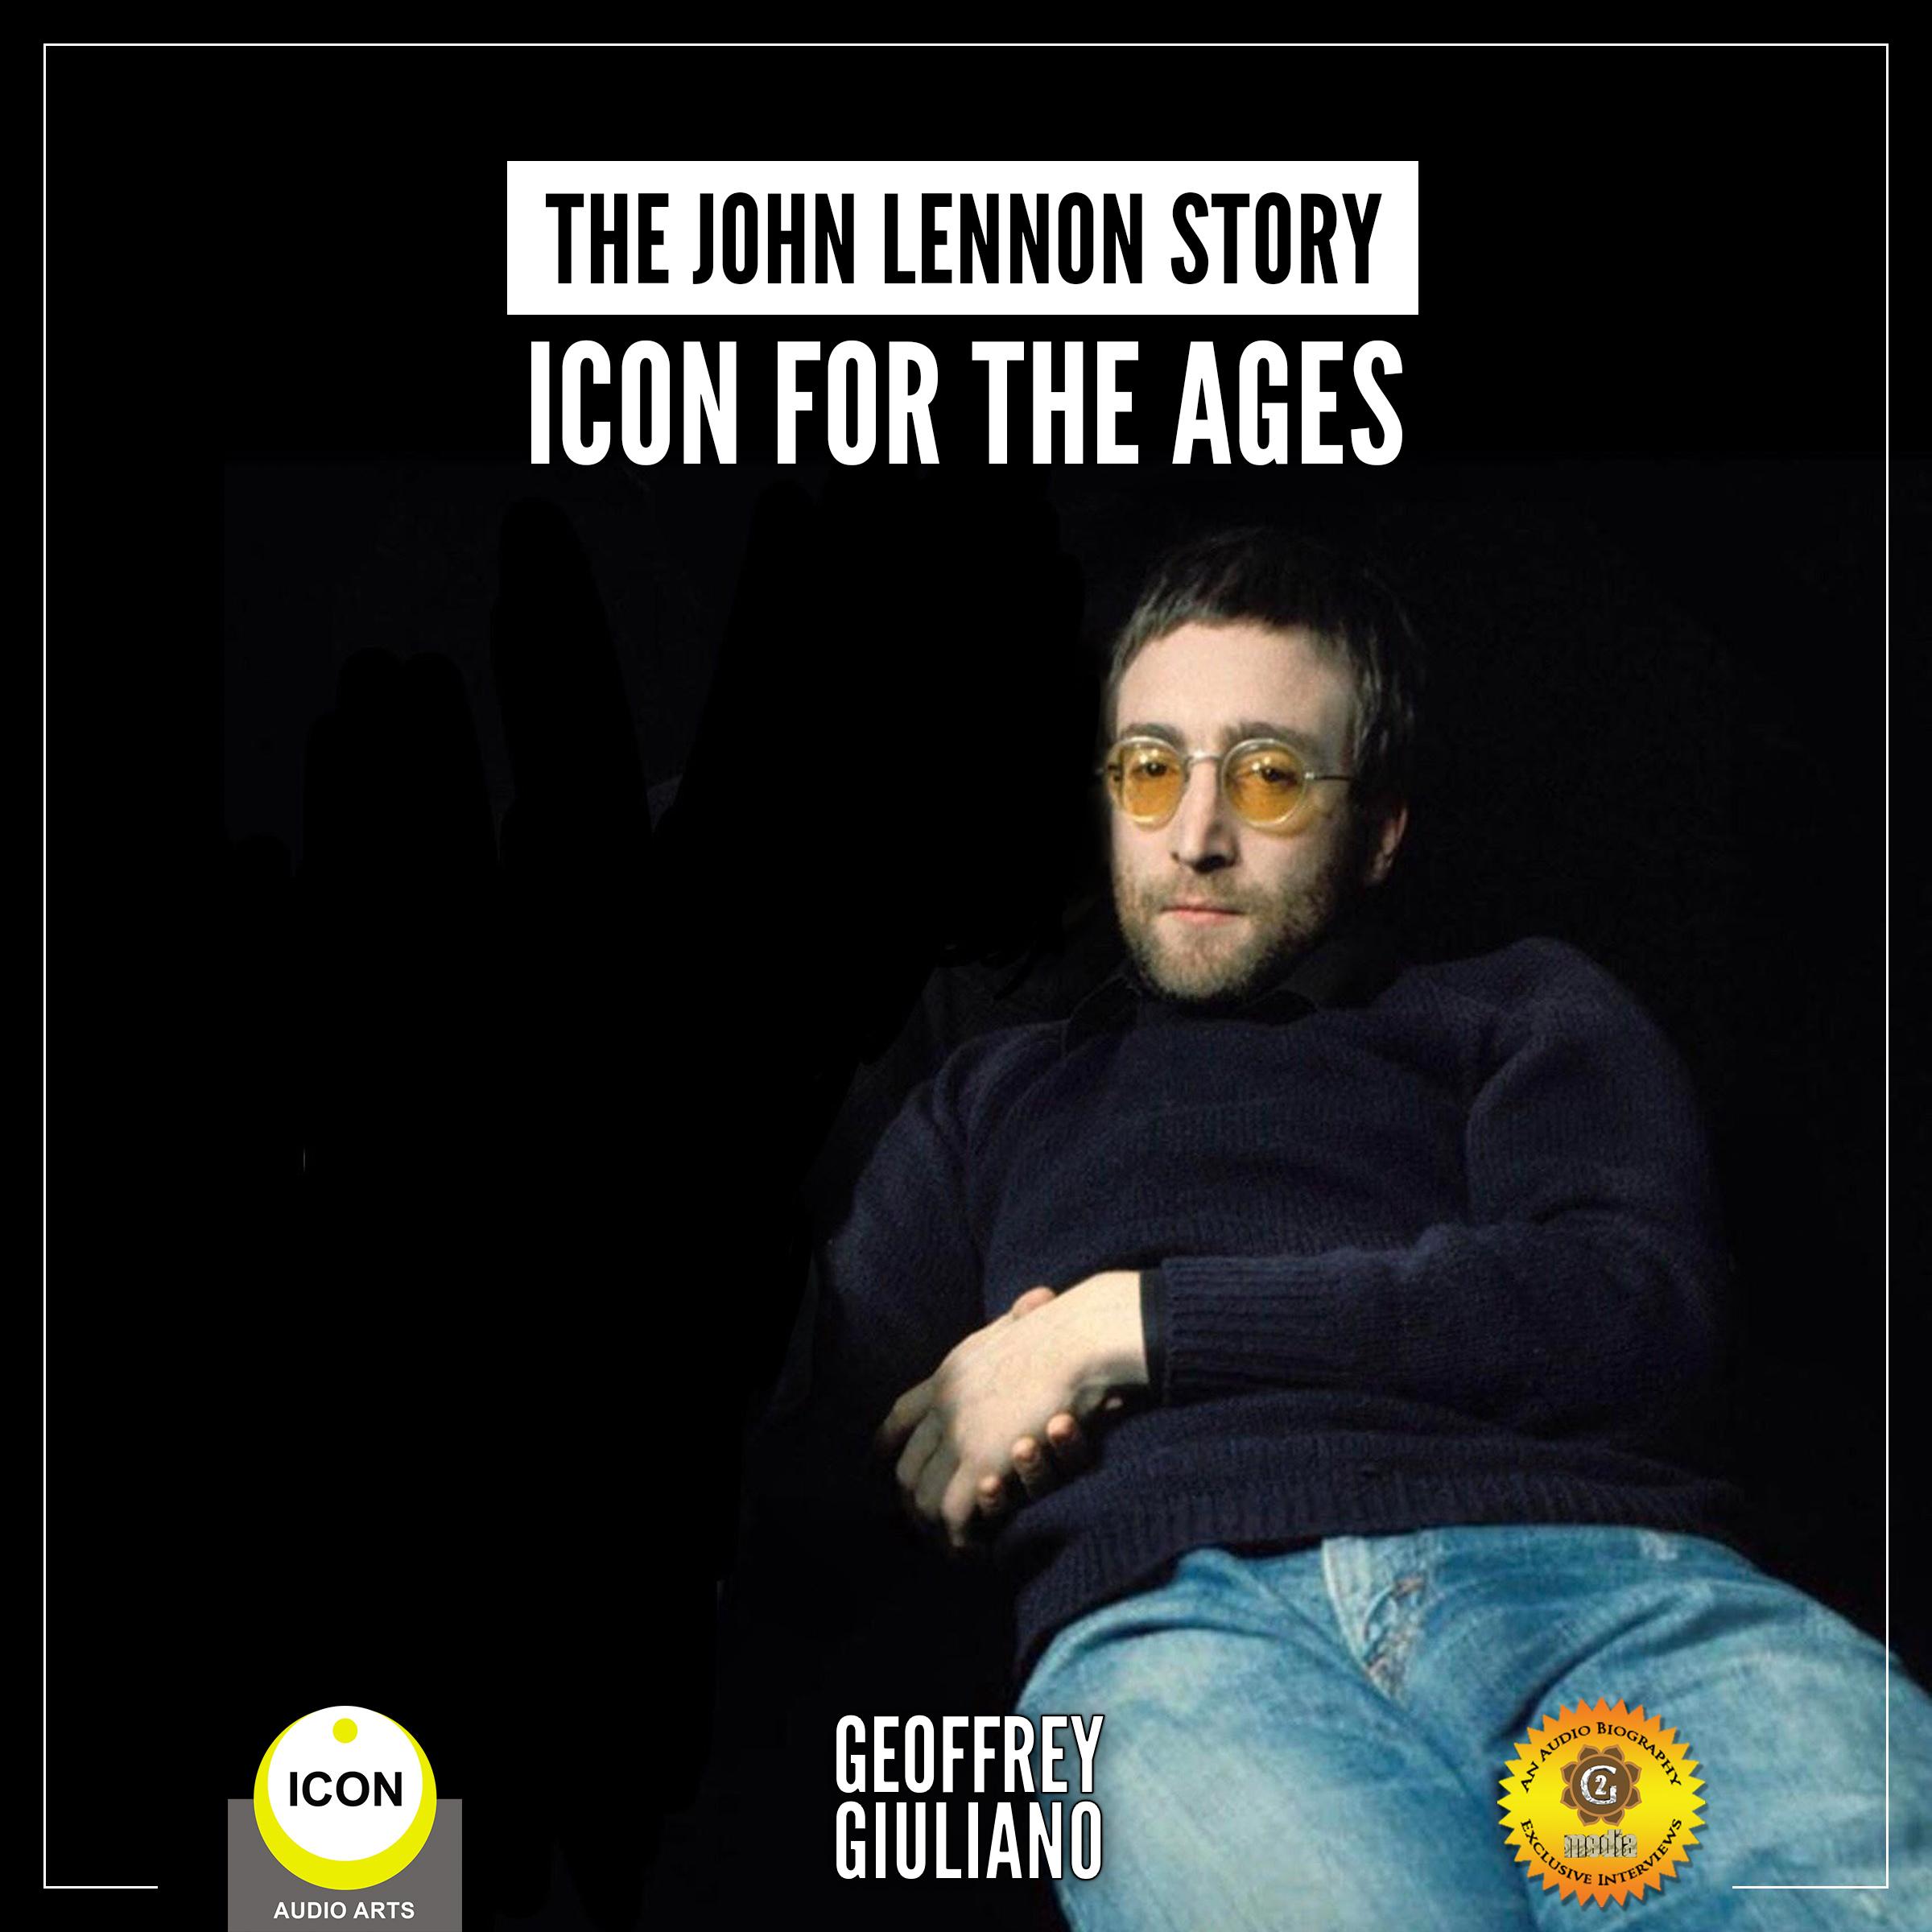 The John Lennon Story - Icon for the Ages